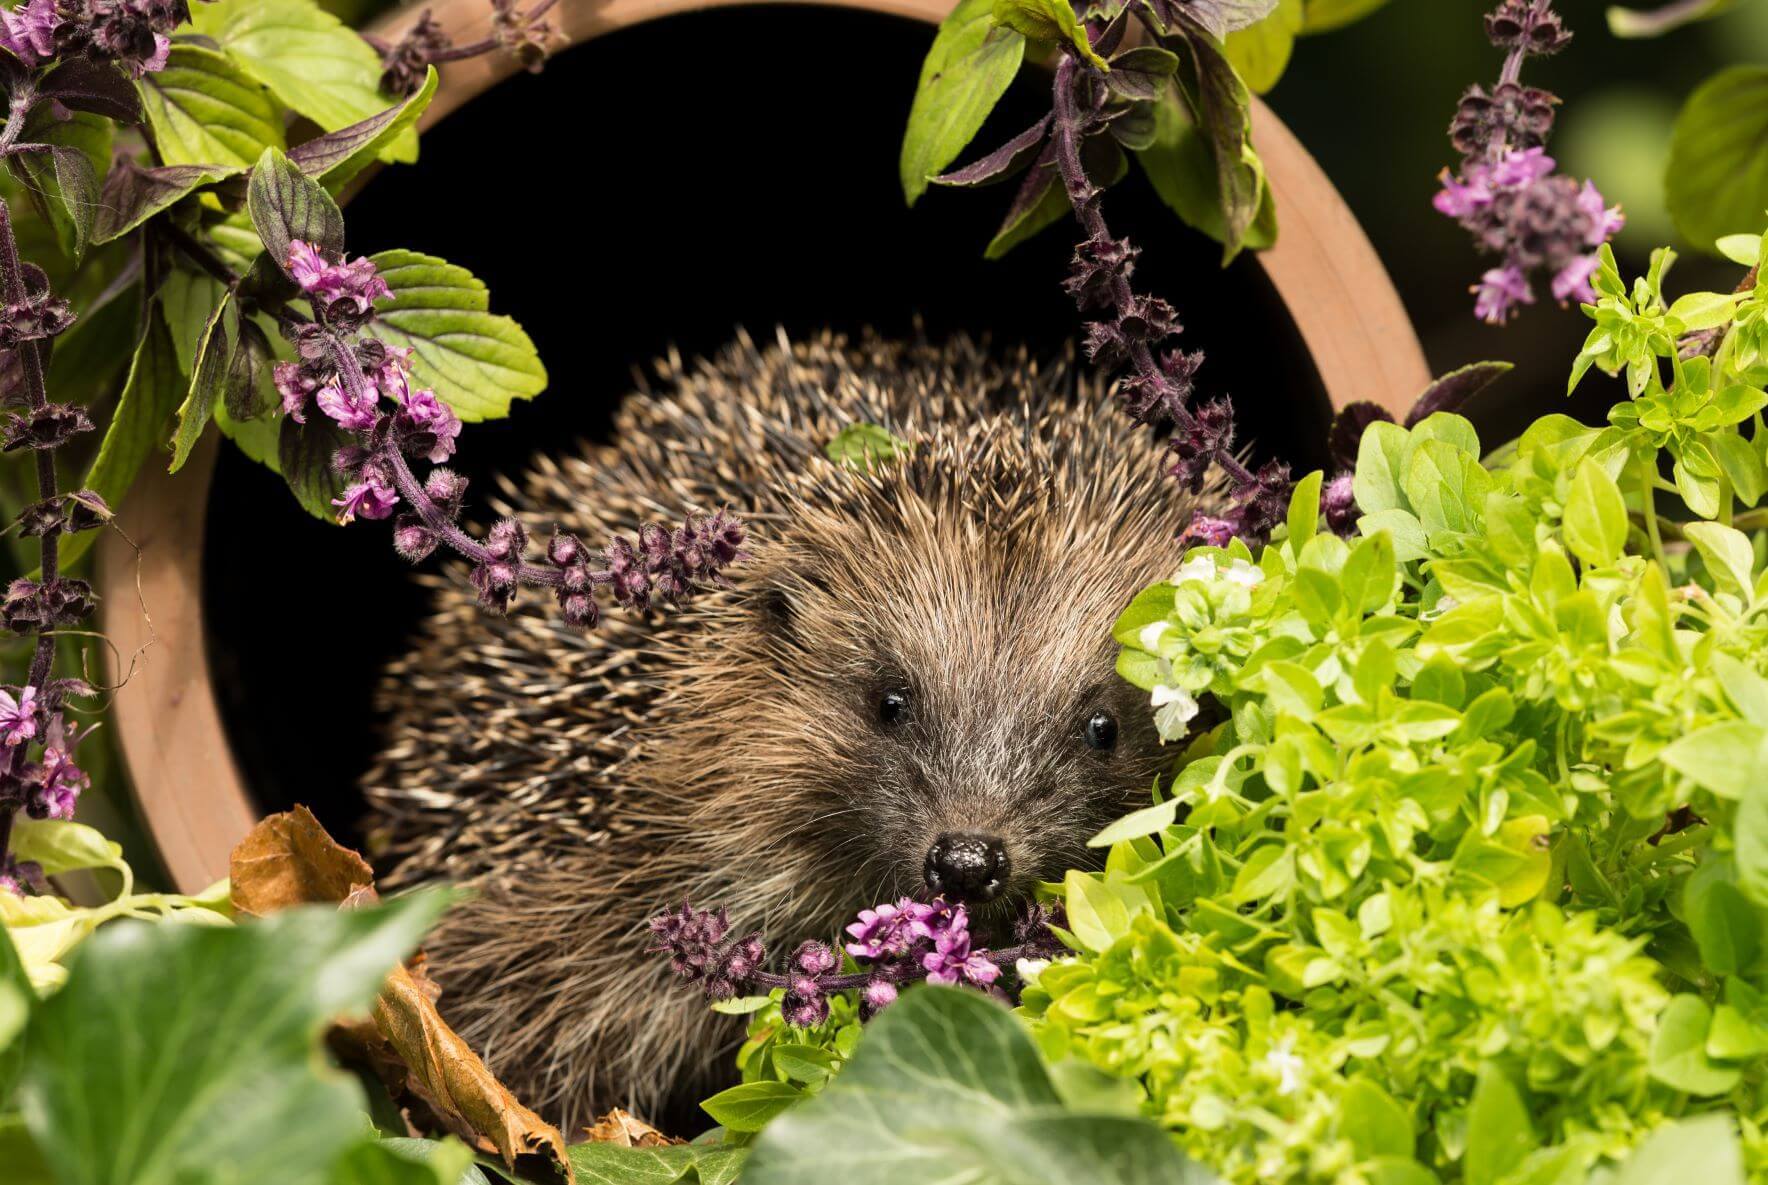 porcupine in a pot with green plants and purple flowers